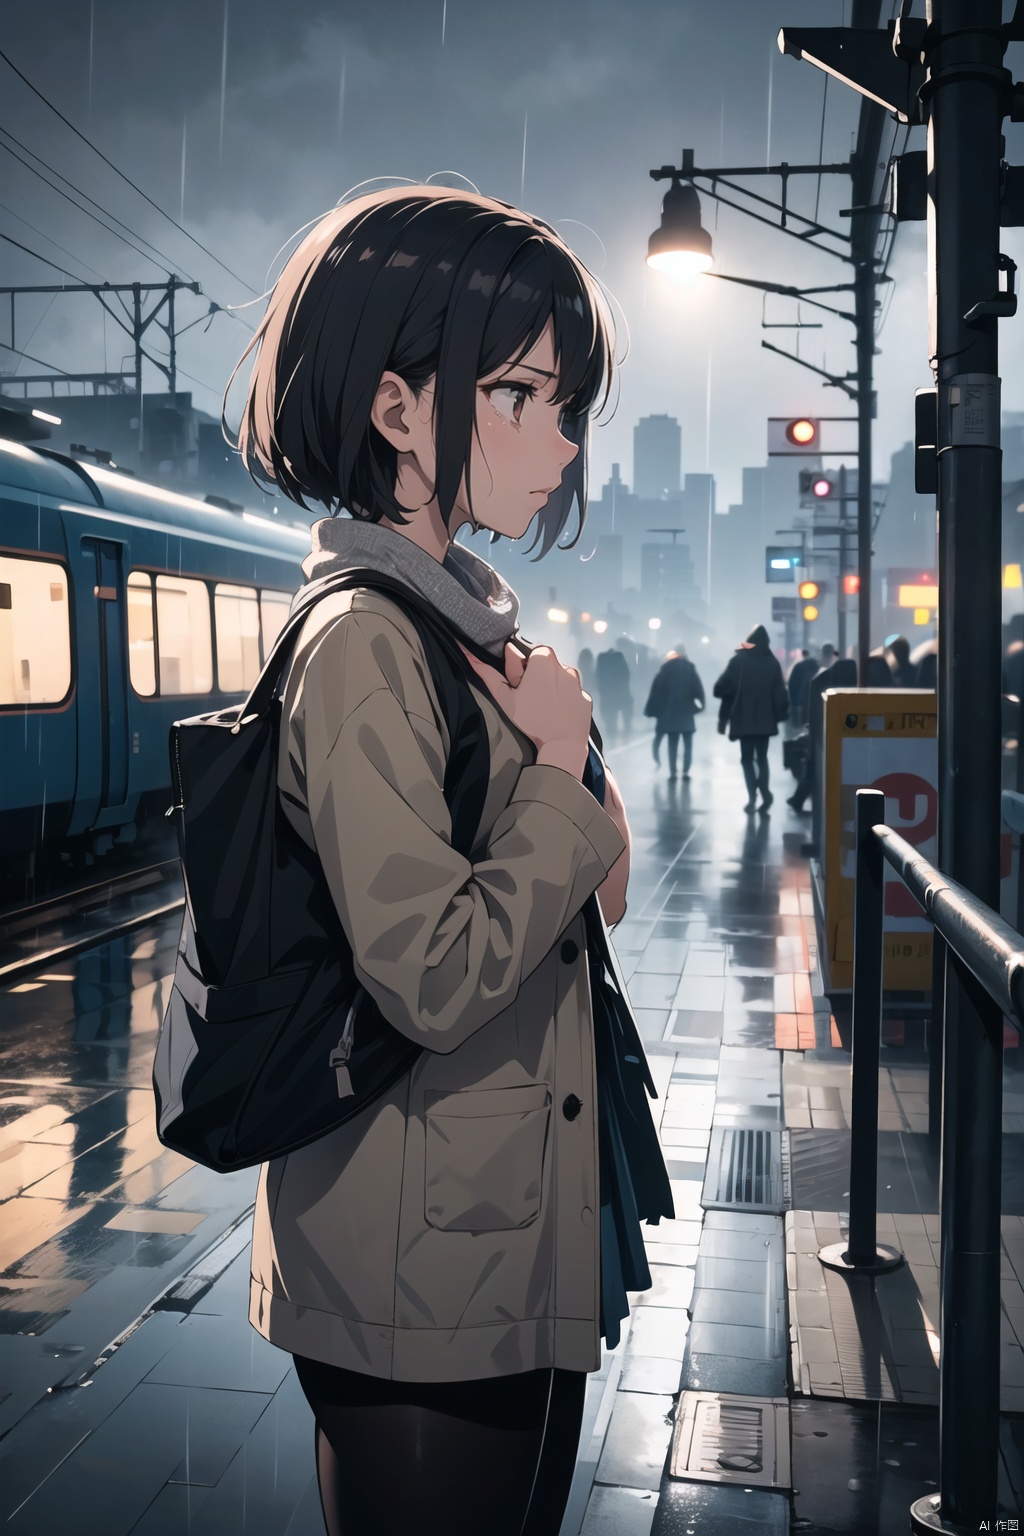  A young woman stands on a rain-soaked train platform, her tears mingling with the rain, blurring her features. Her gaze follows the departing train, her handkerchief clutched tightly as if suppressing deep sorrow. The platform lights appear particularly dim in the rain, and her silhouette is especially lonely under the glow.
